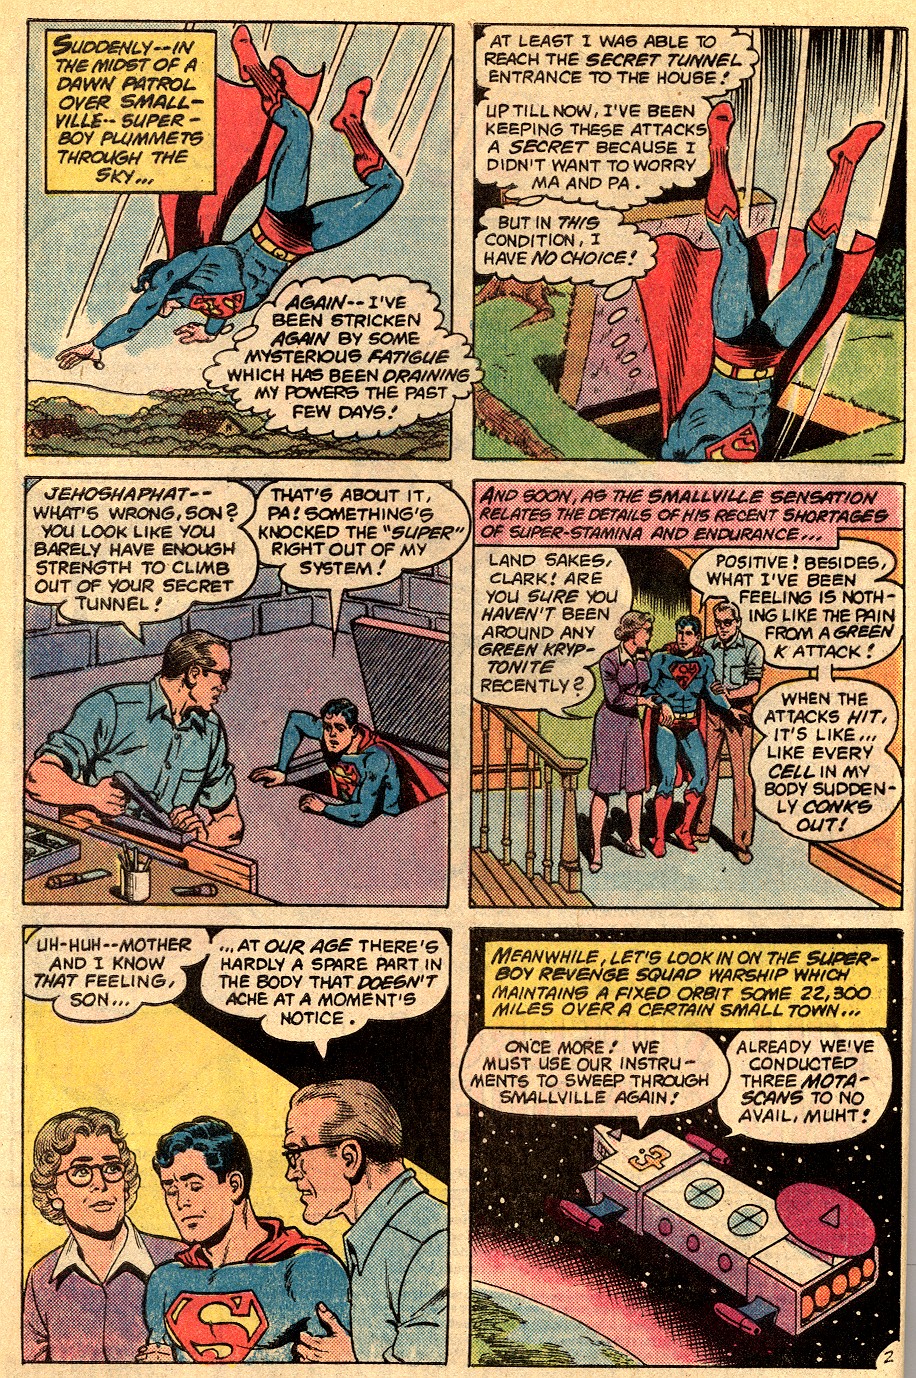 The New Adventures of Superboy 33 Page 3